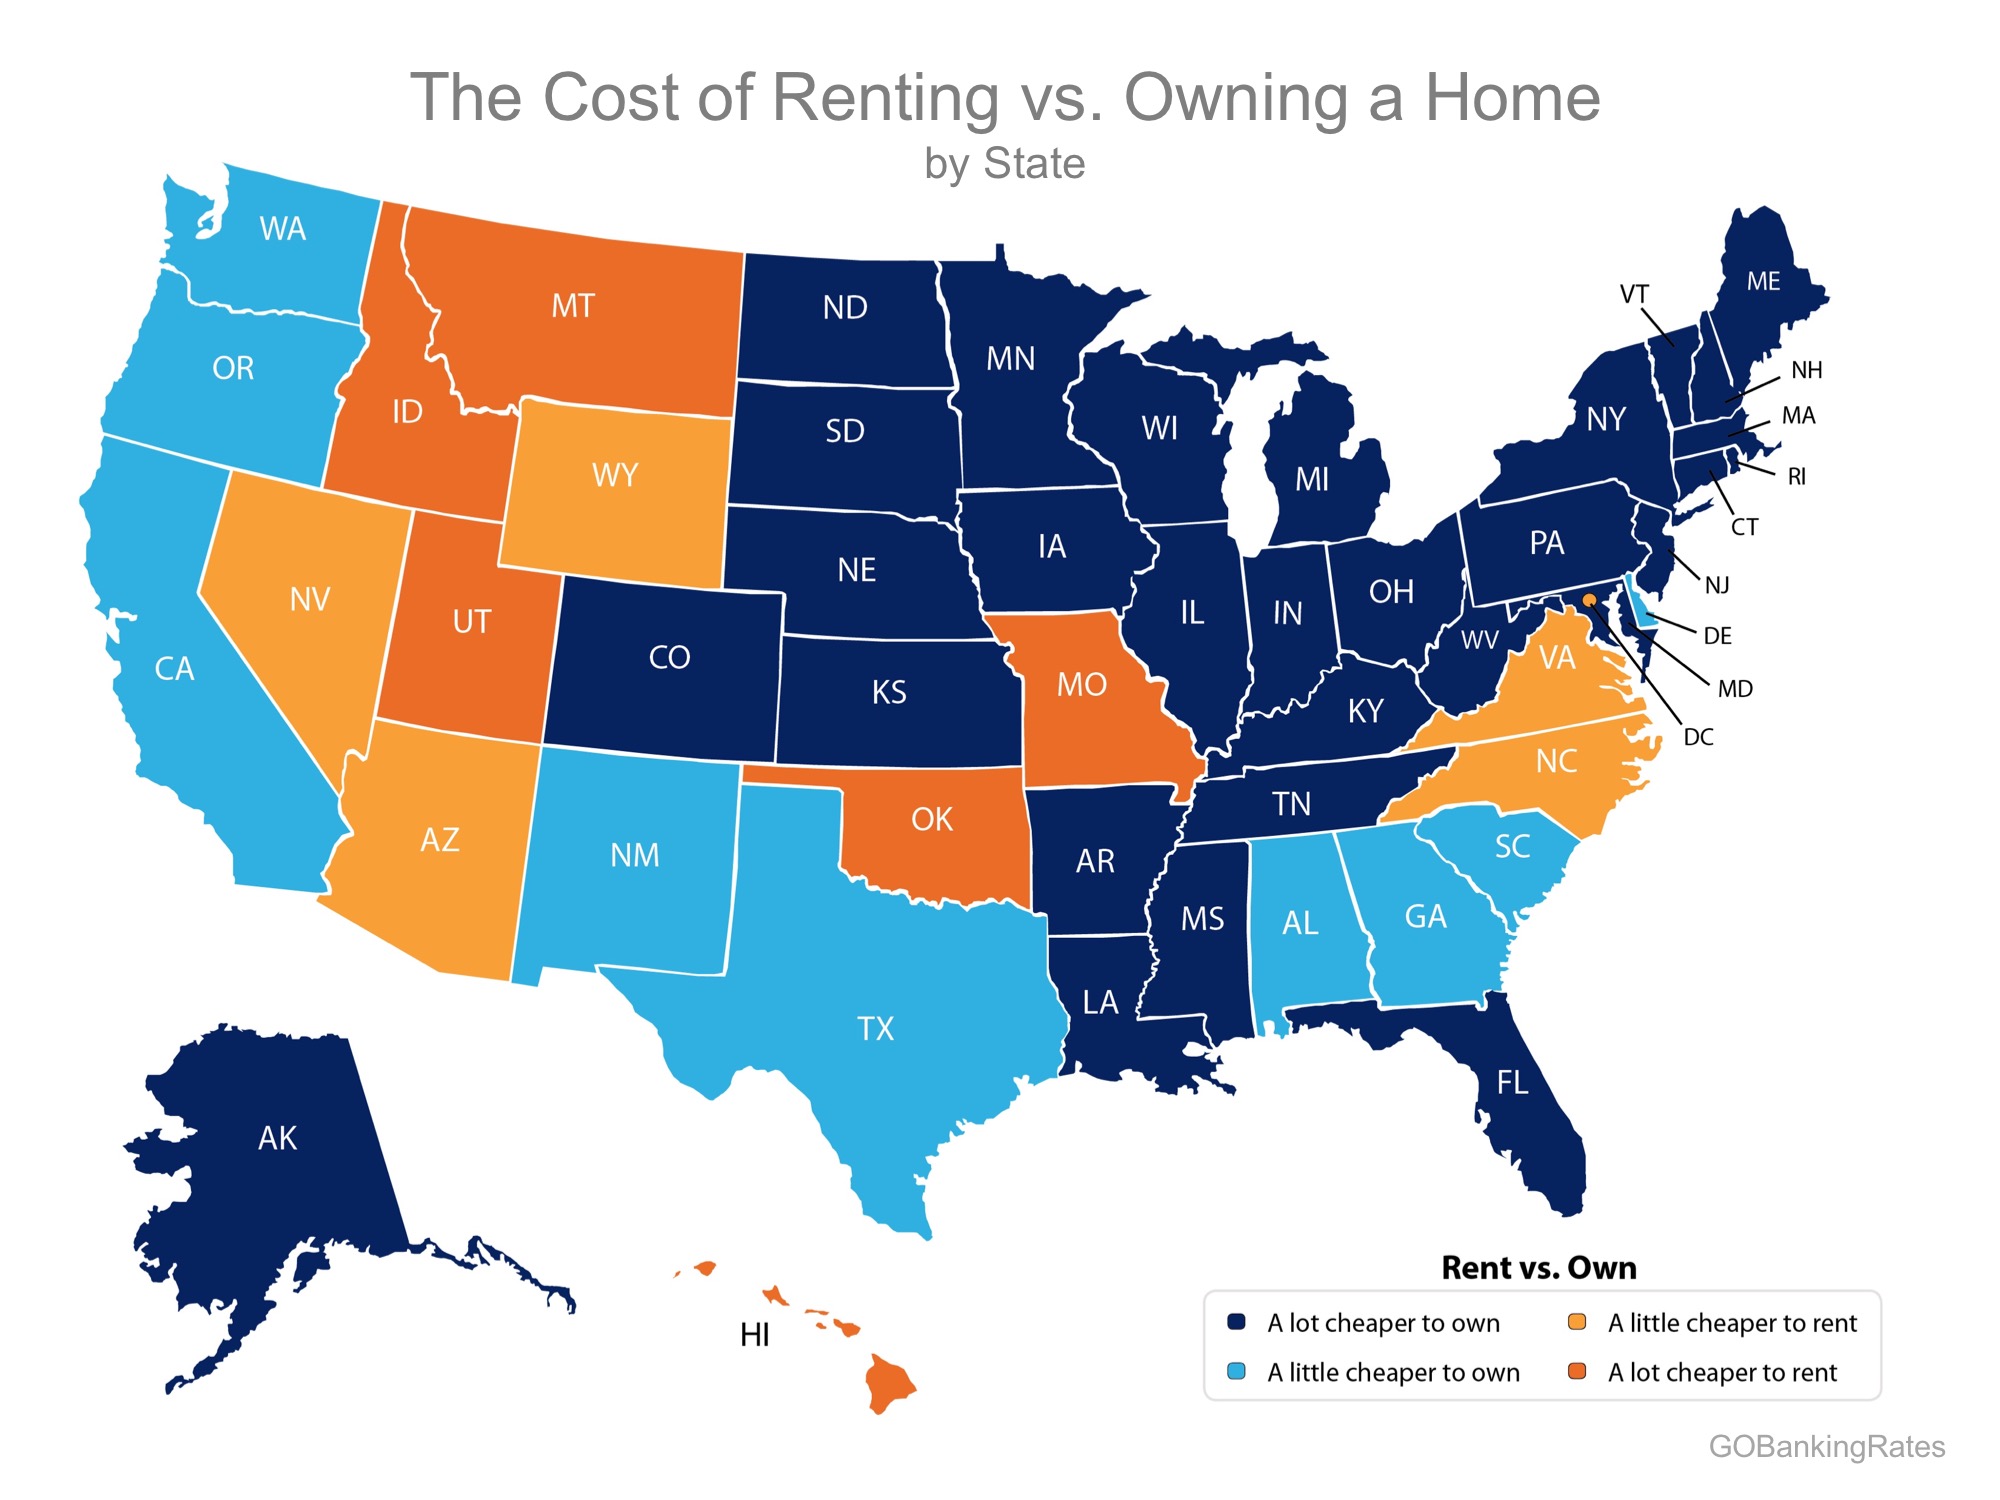 Buying Remains Cheaper Than Renting in 39 States